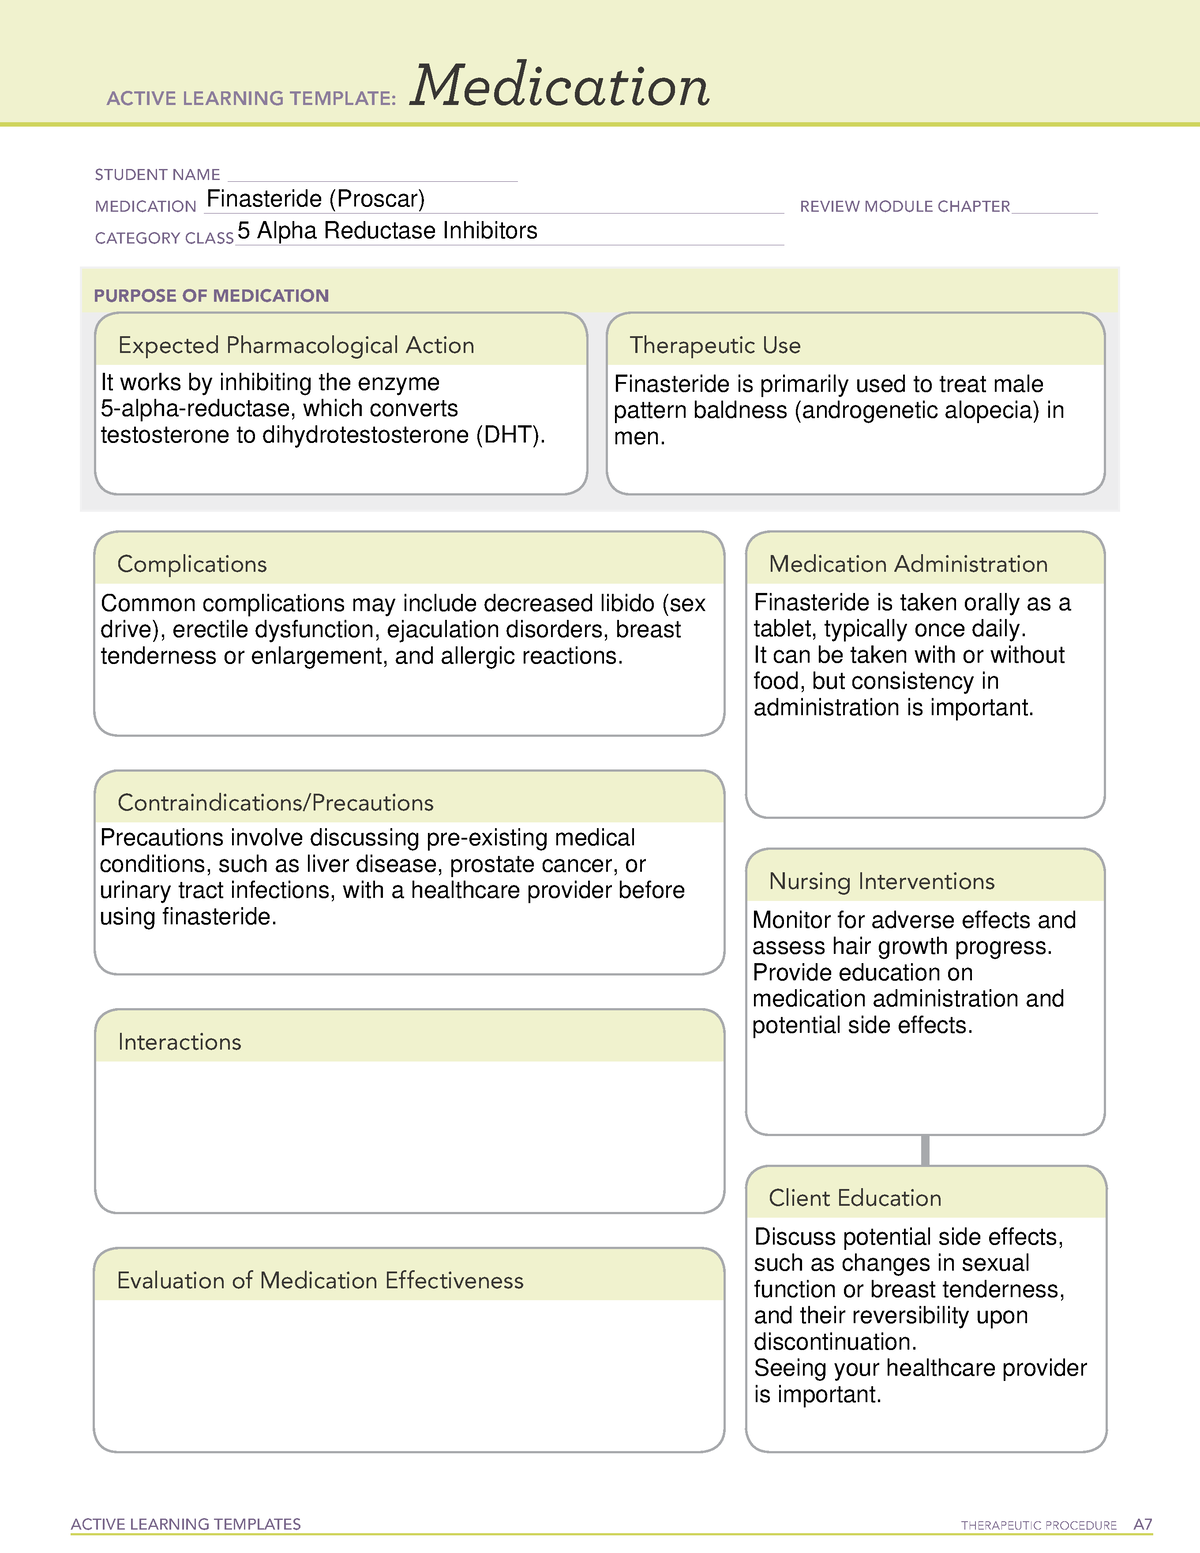 finasteride-proscar-active-learning-template-active-learning